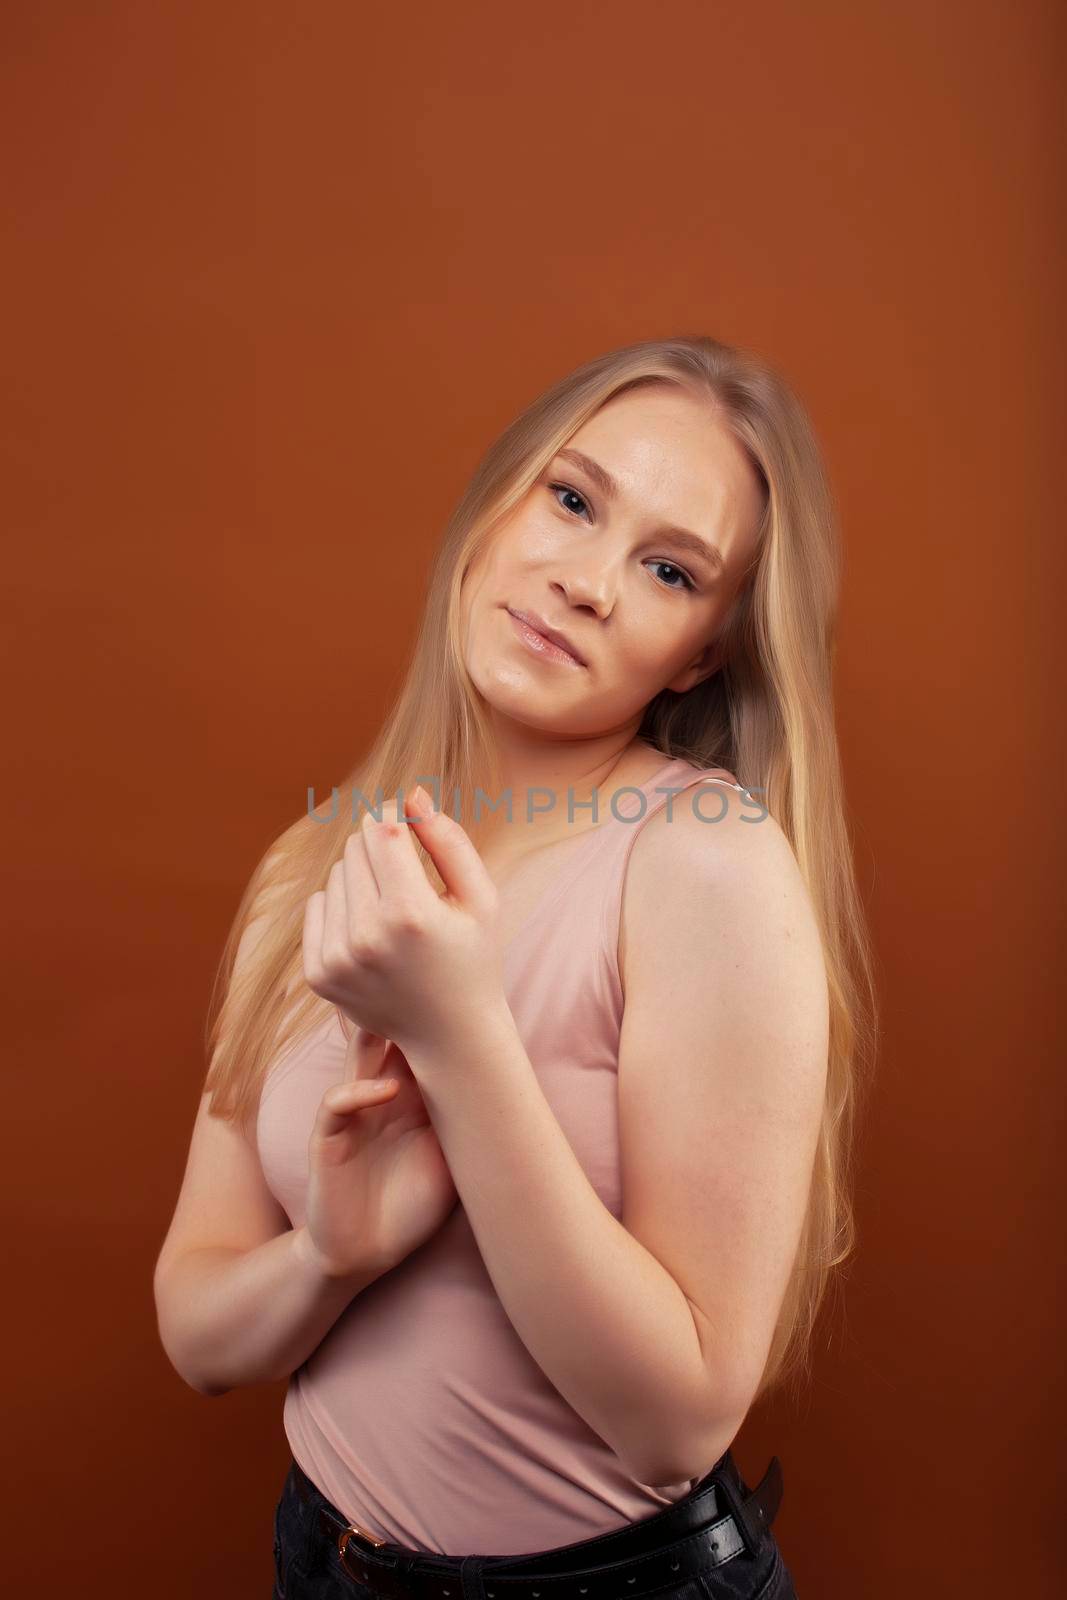 young pretty girl with blond hair posing cheerful on brown background, lifestyle people concept close up